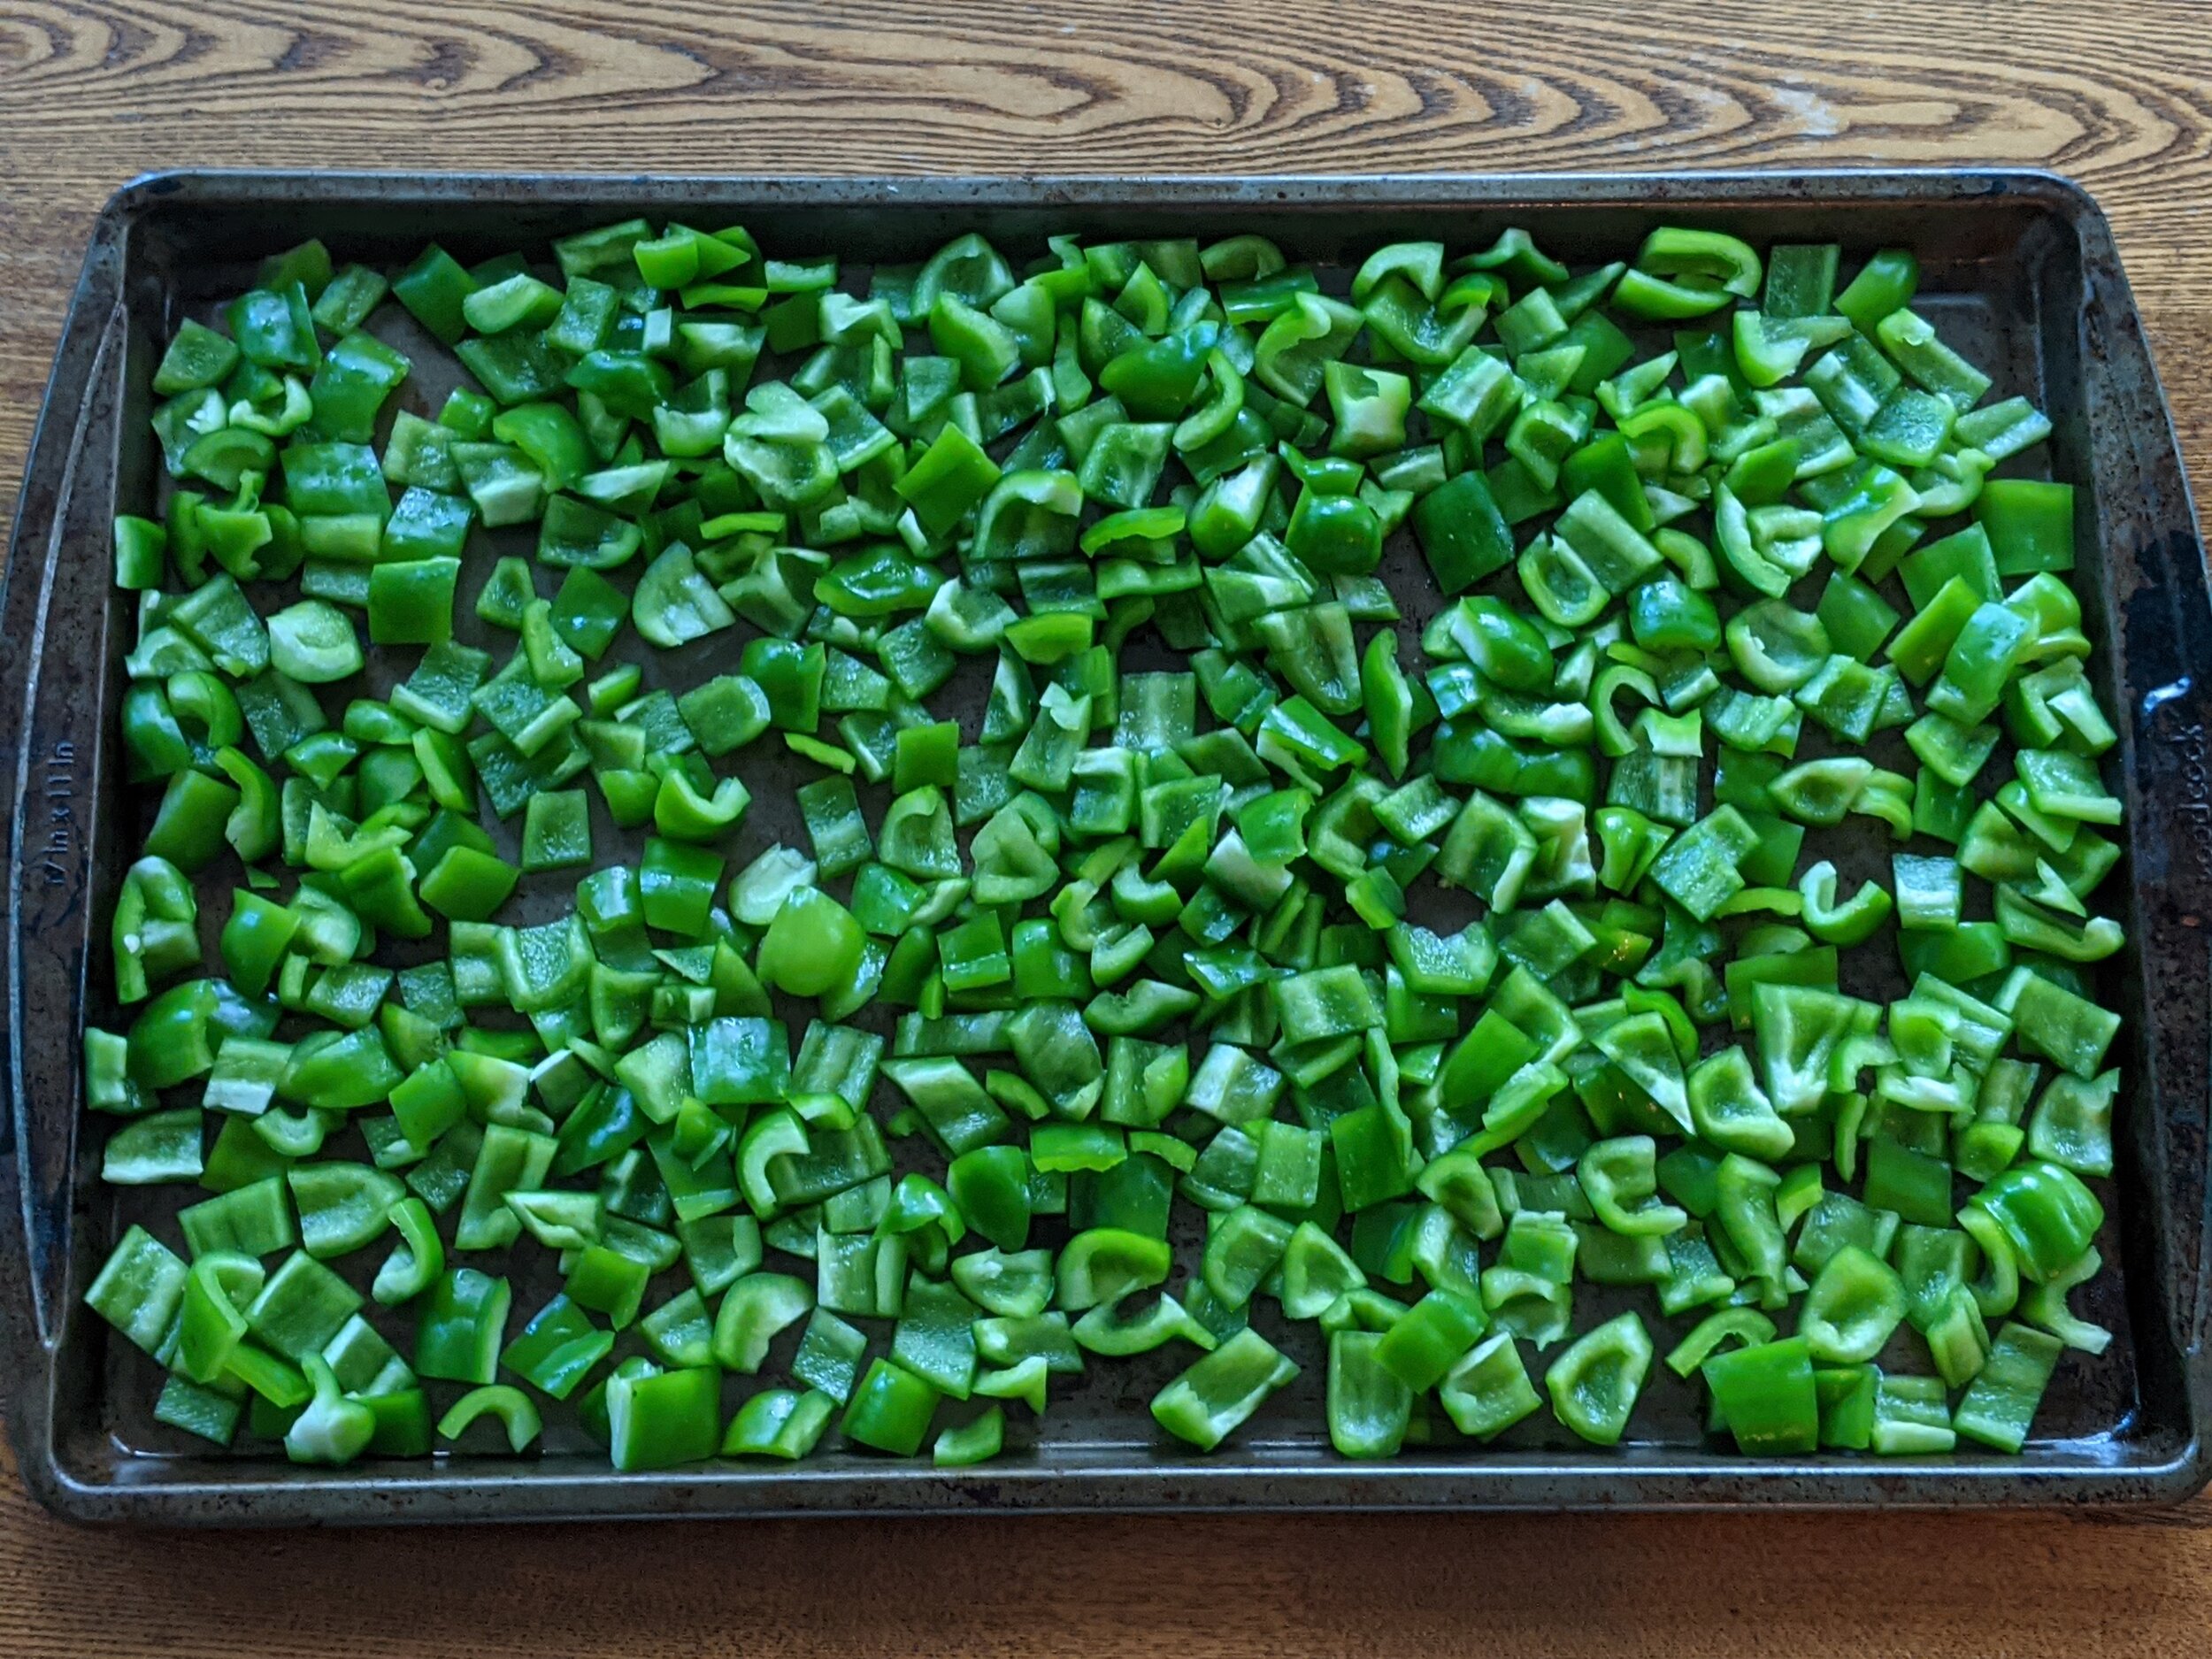 Step 3: Spread peppers on baking sheet.